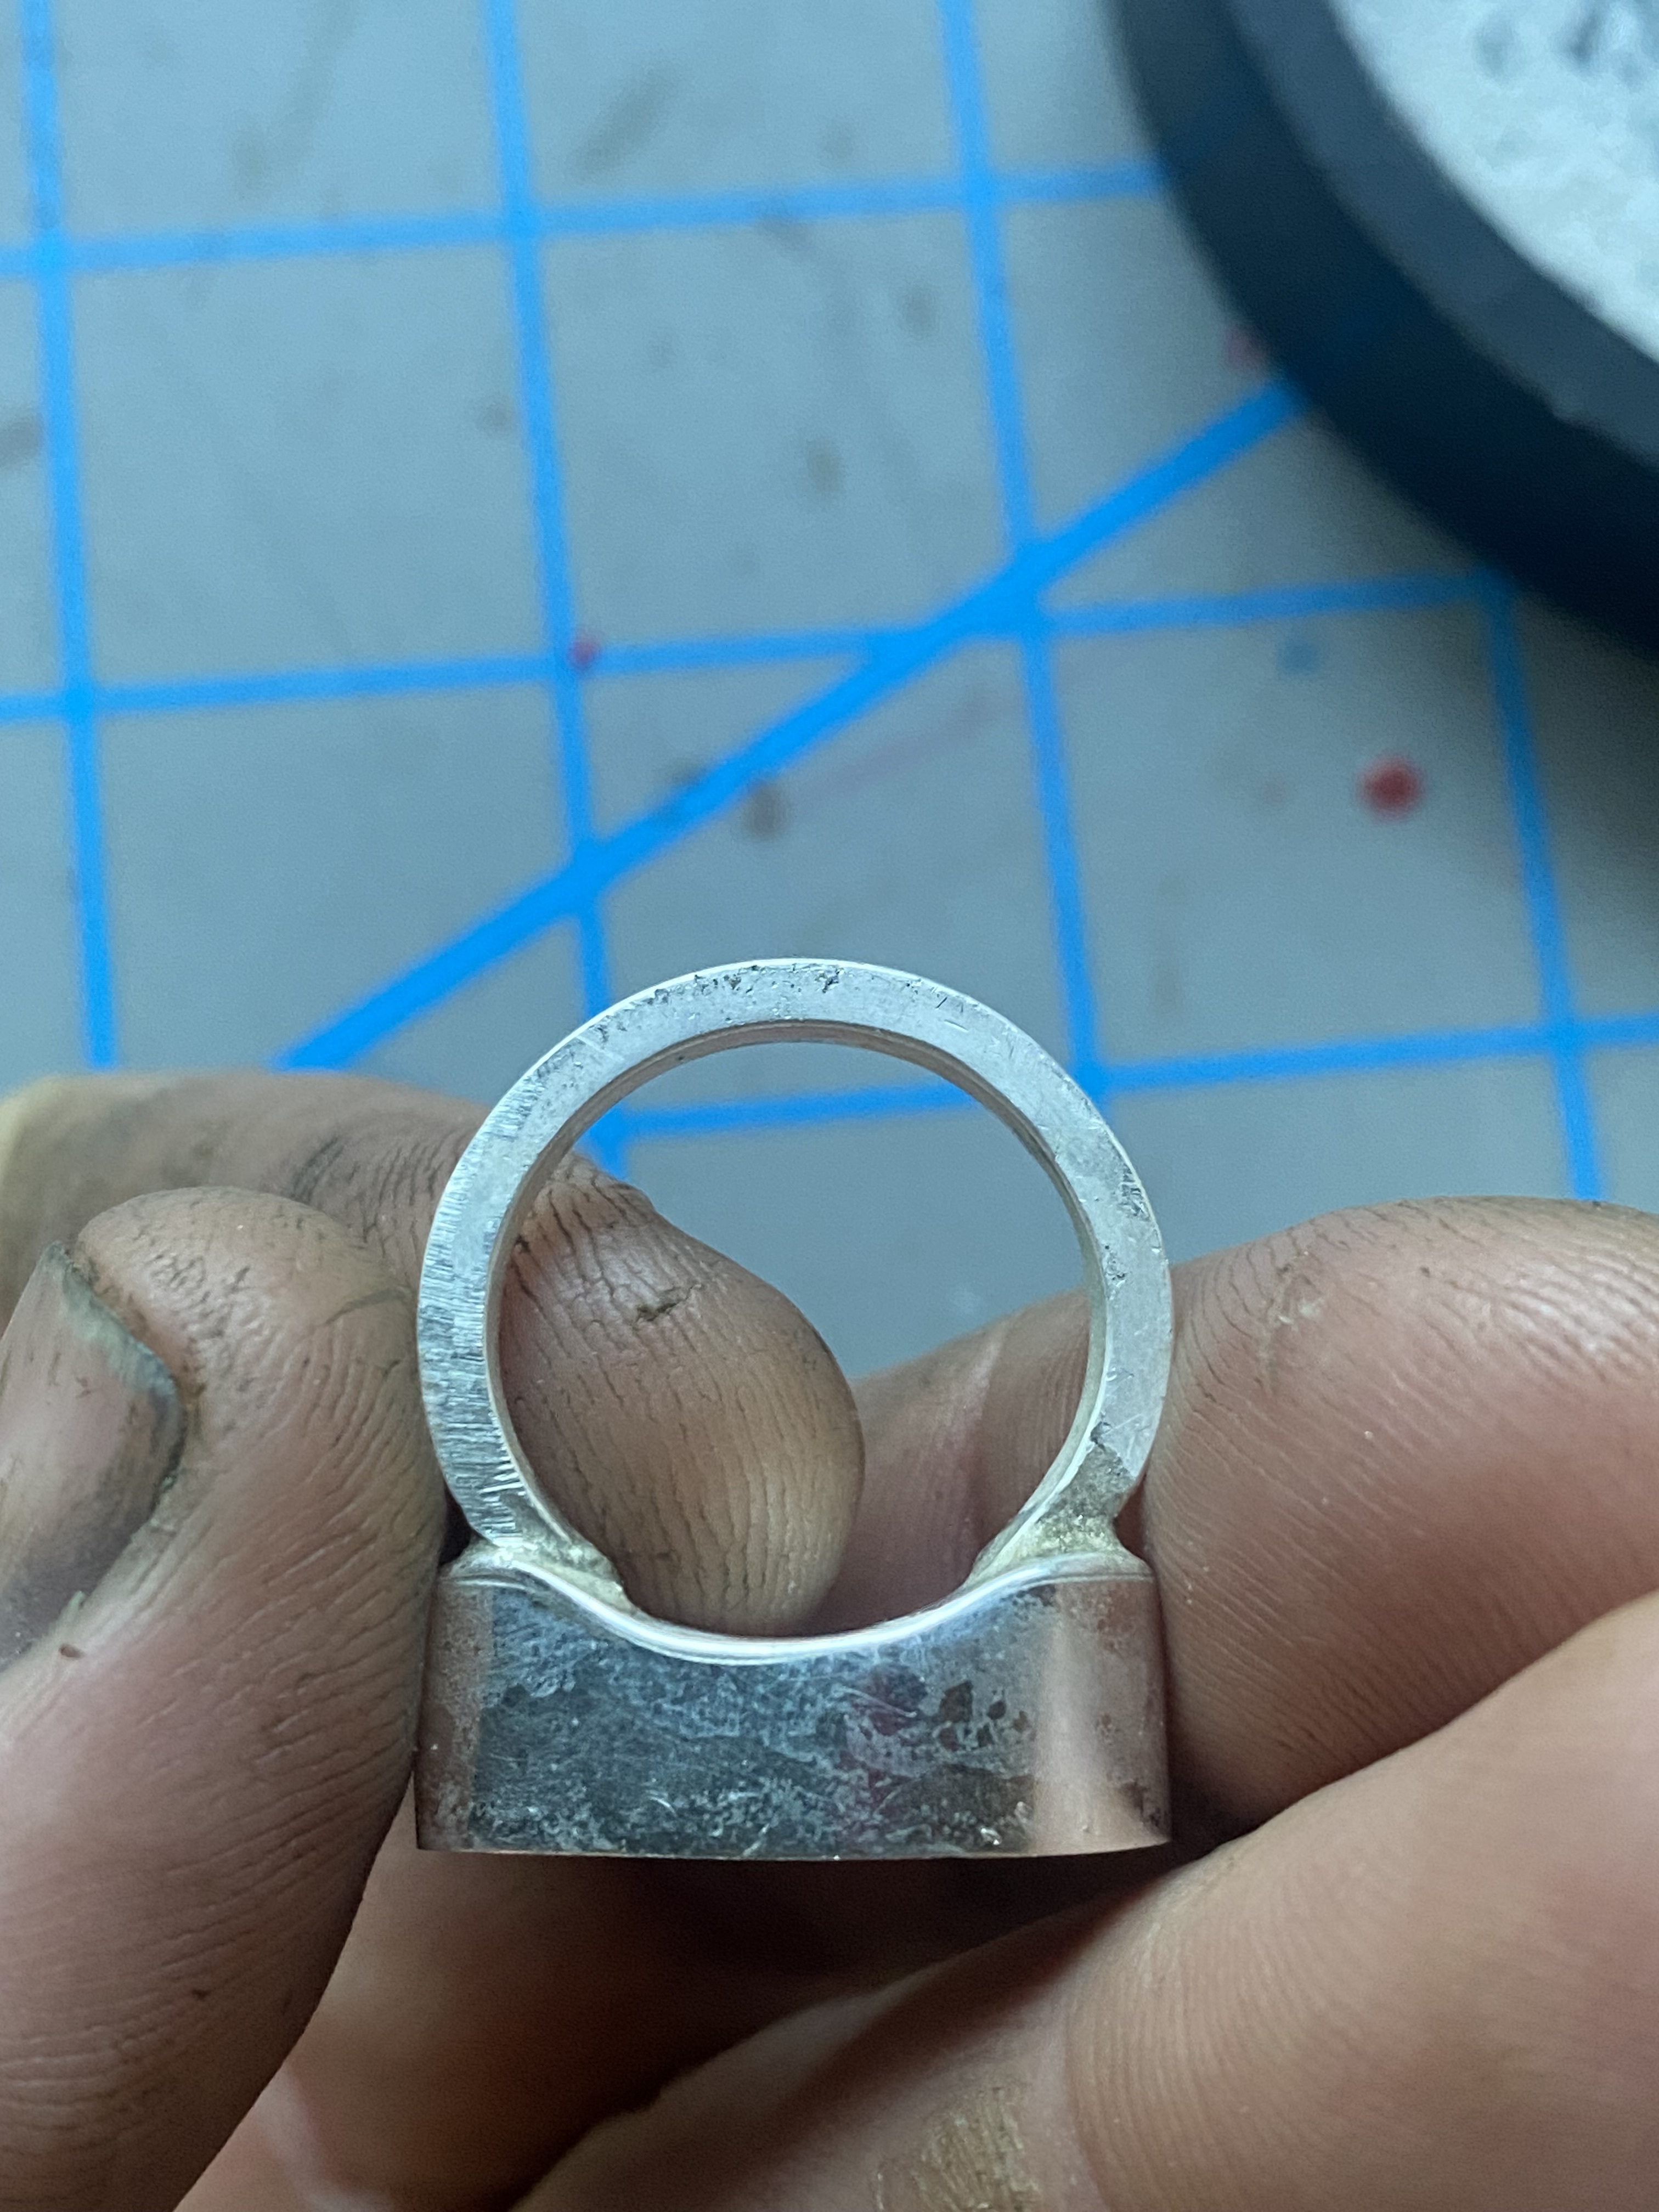 Im trying to solder gold wire onto a silver ring shank - Jewelry